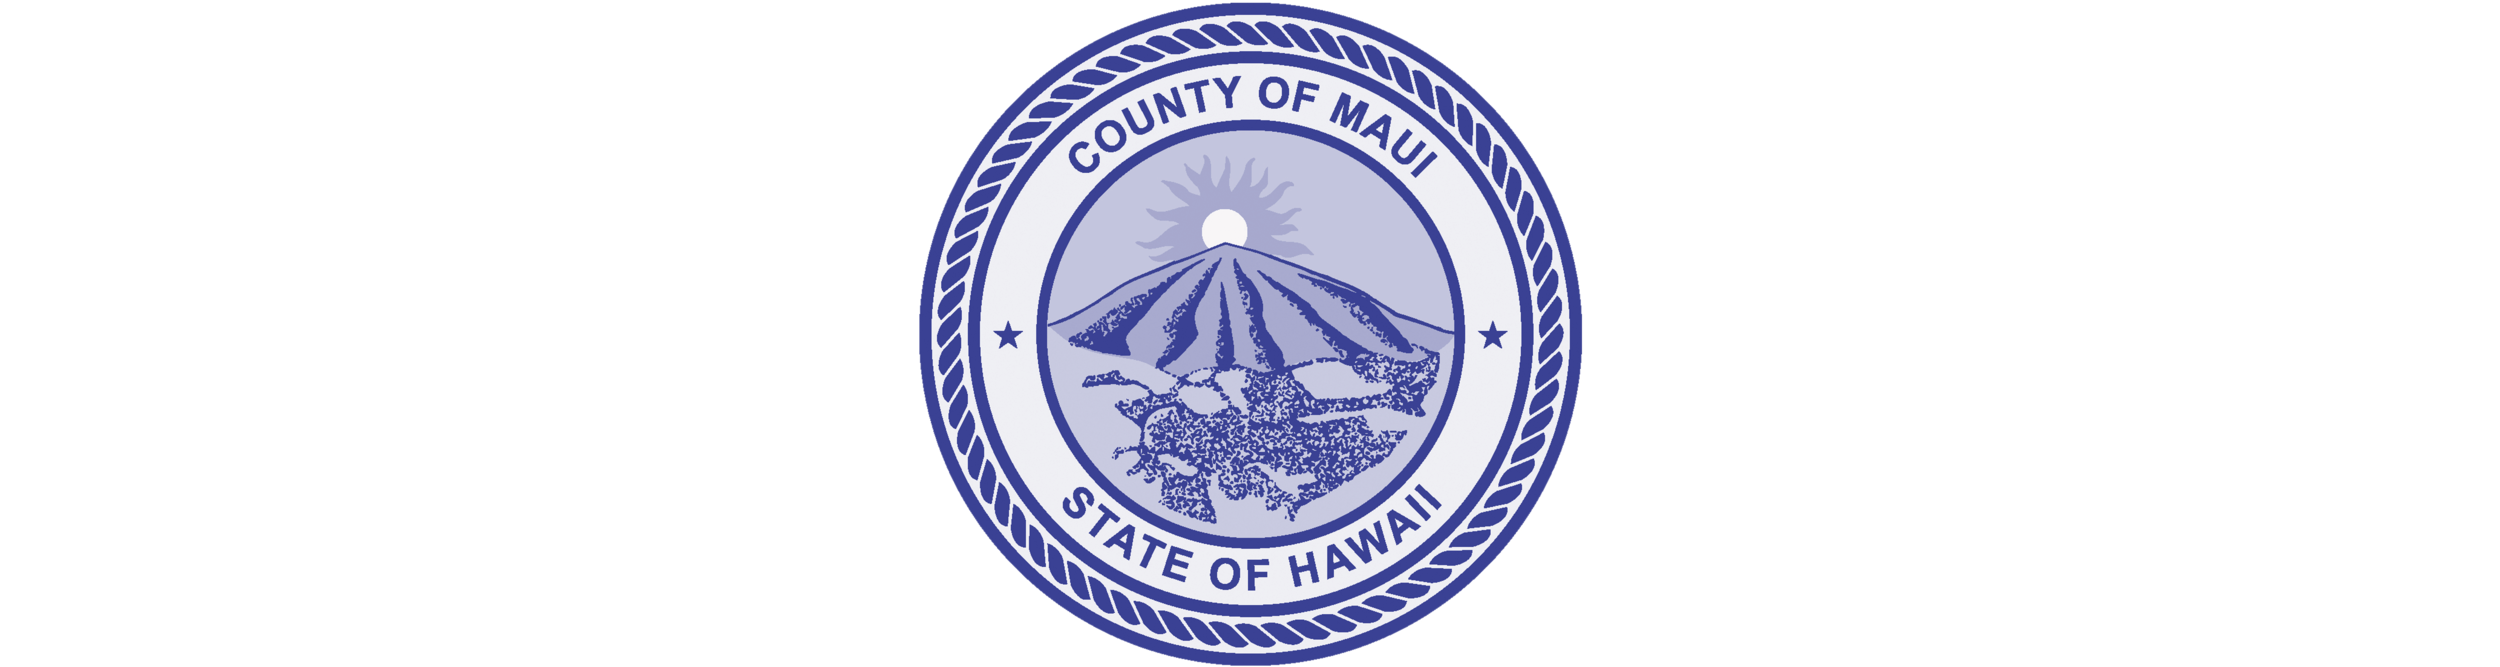 HPHA-resources-logo-Maui-County.png